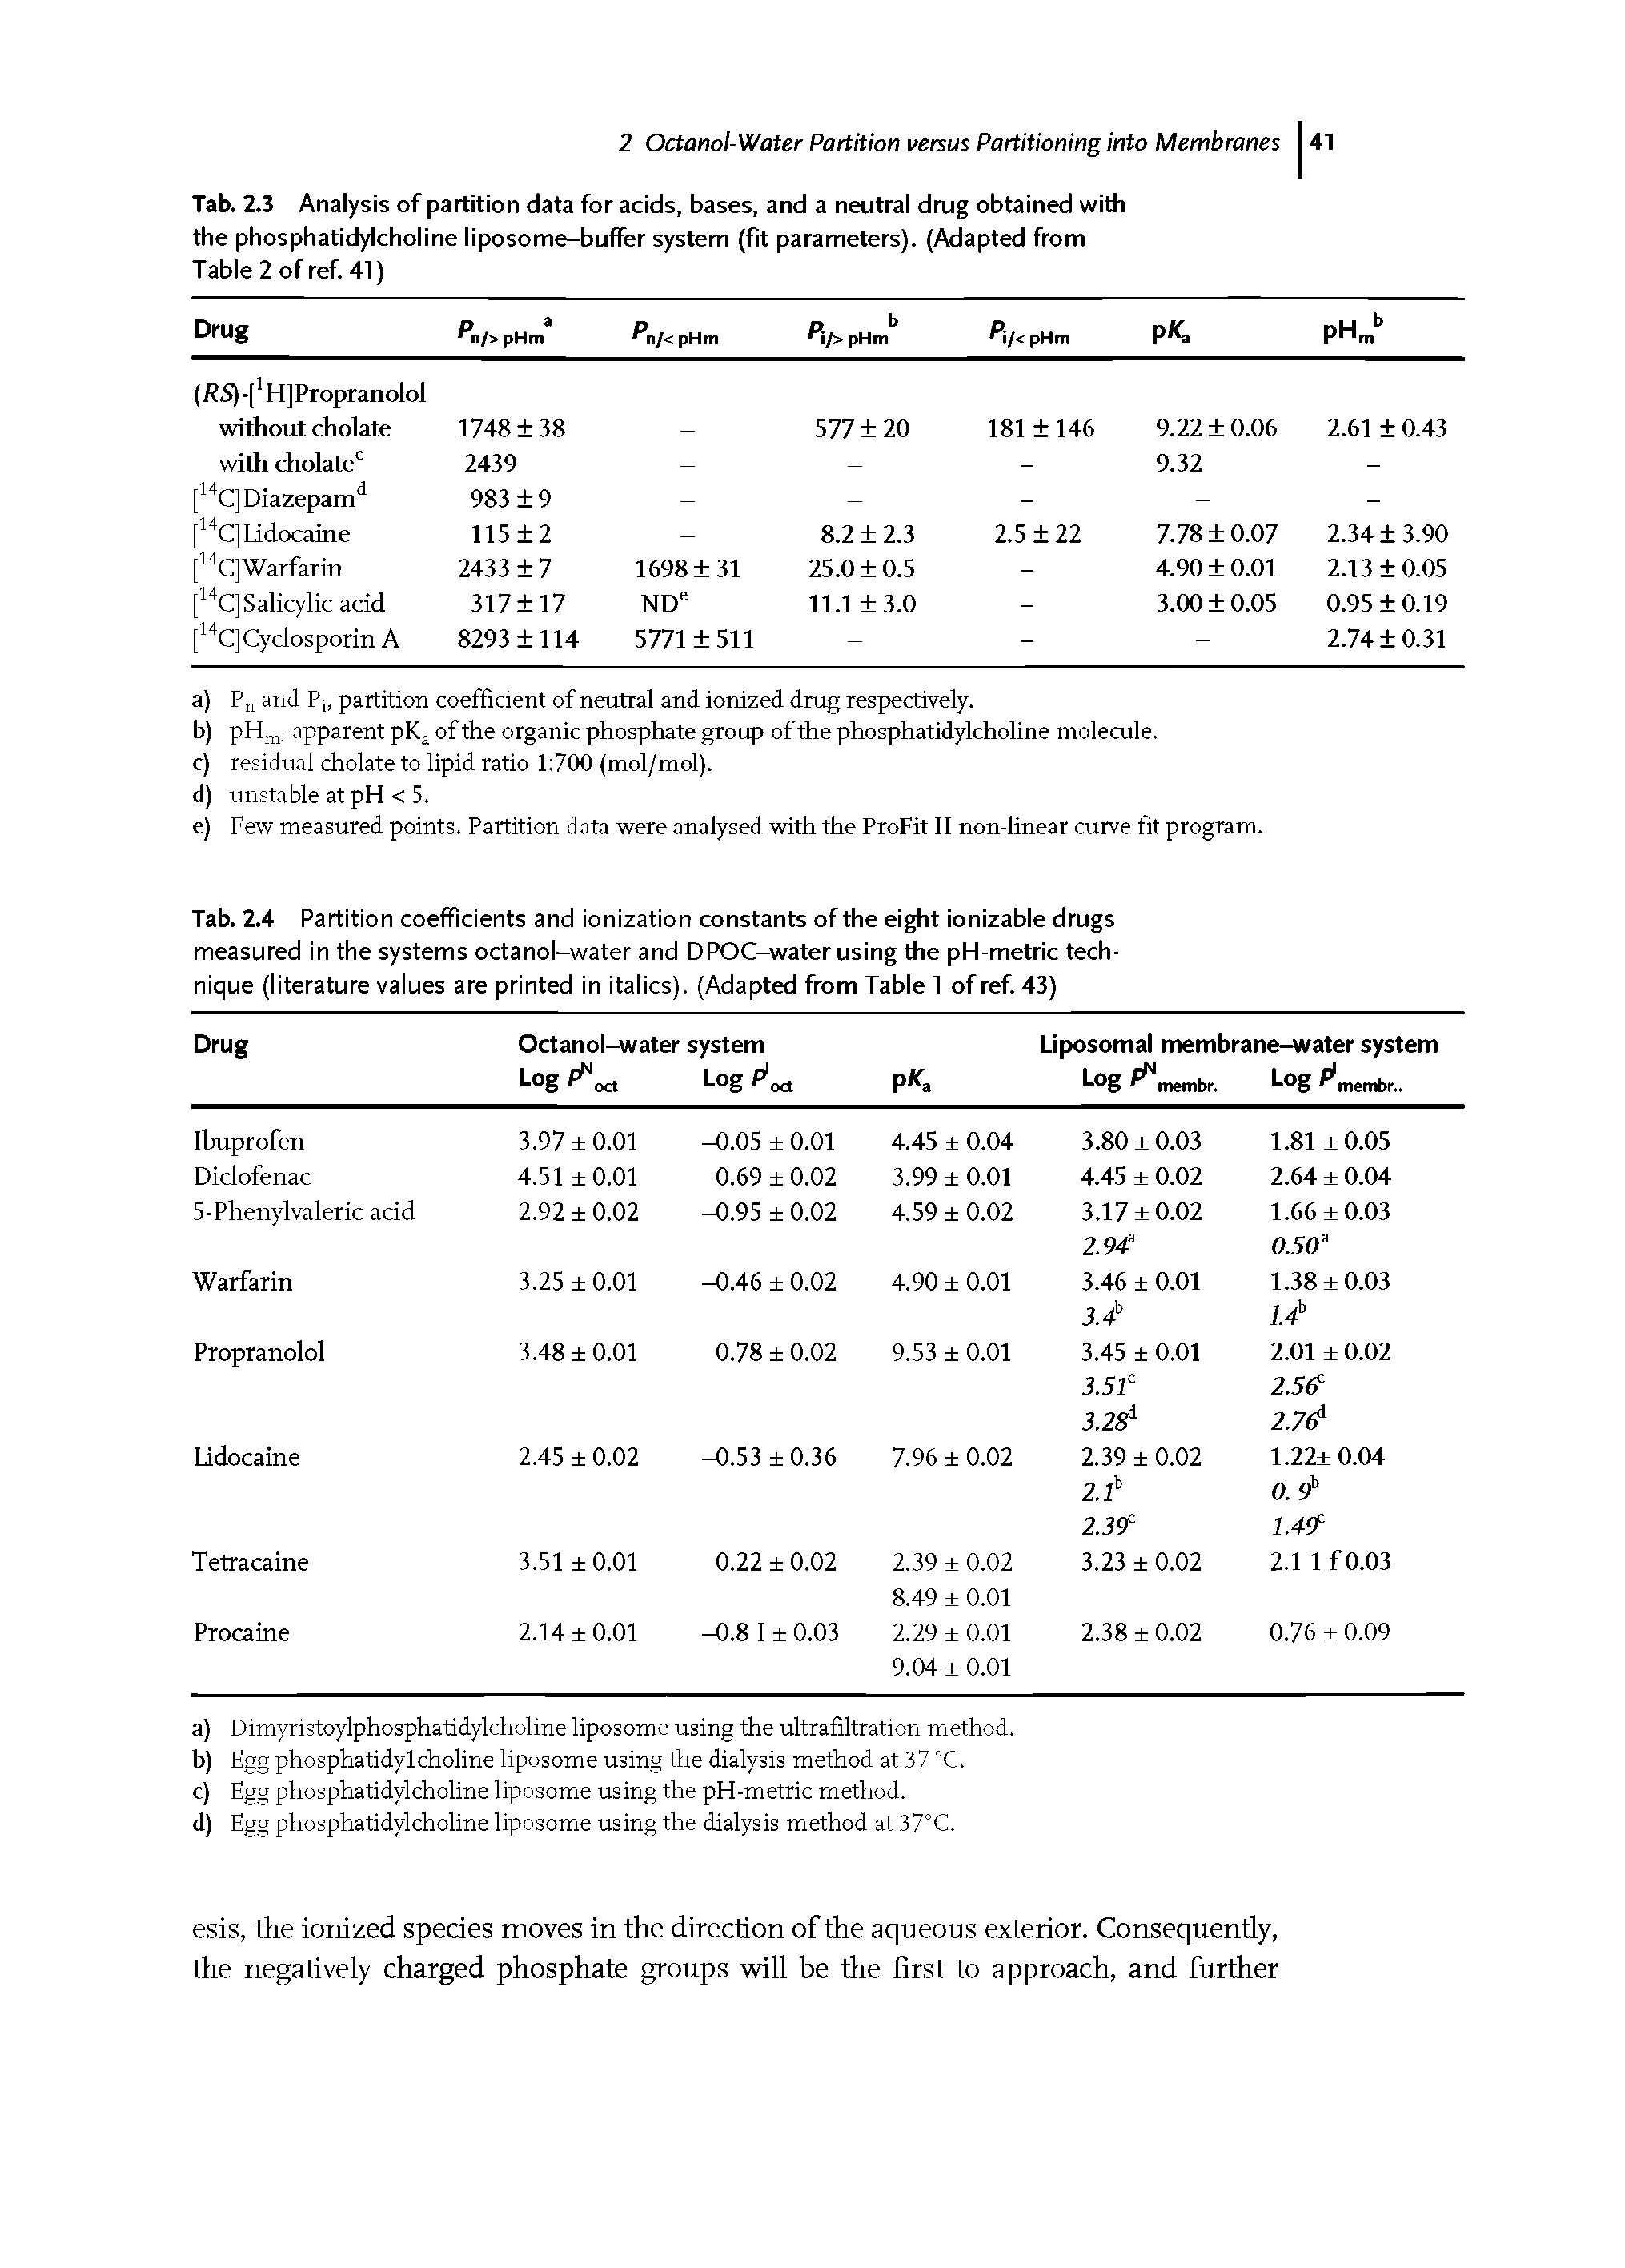 Tab. 2.4 Partition coefficients and ionization constants of the eight ionizable drugs measured in the systems octanol-water and DPOC-water using the pH-metric technique (literature values are printed in italics). (Adapted from Table 1 of ref. 43)...